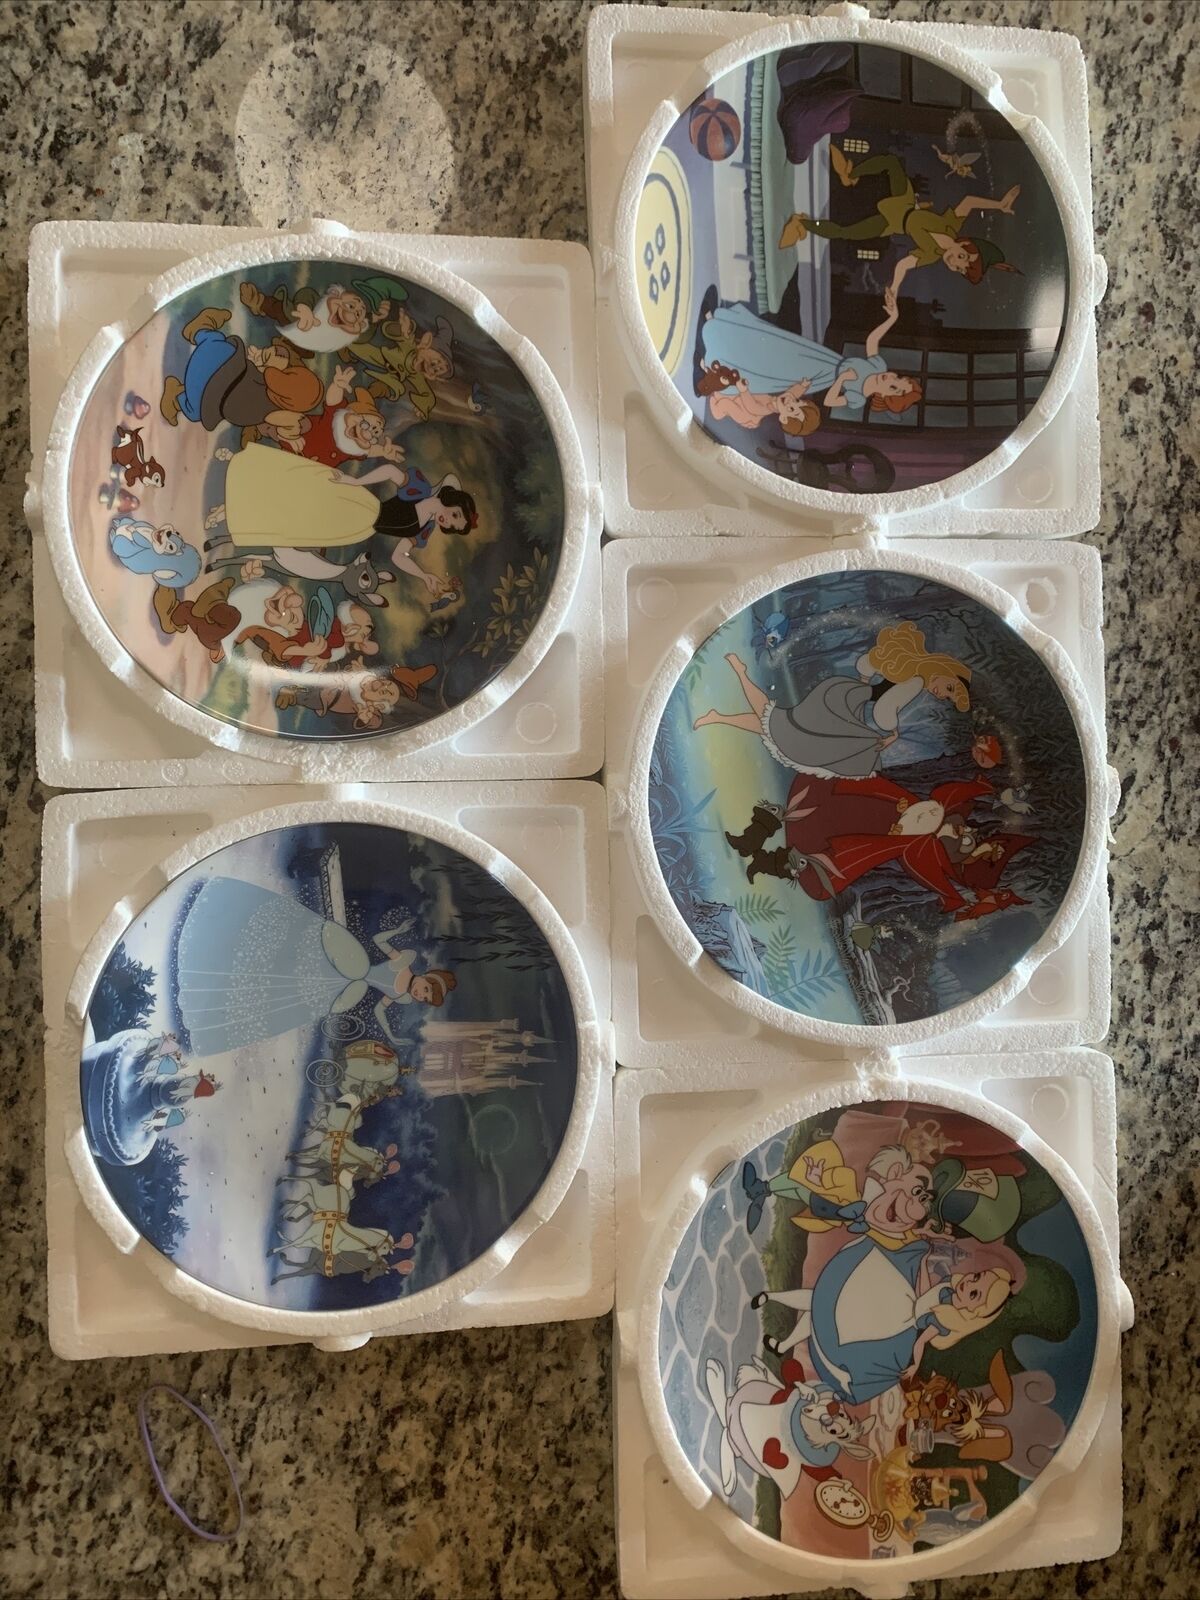 Disney Treasured Moments Collector Plates - Brand New - Plates #1-#5